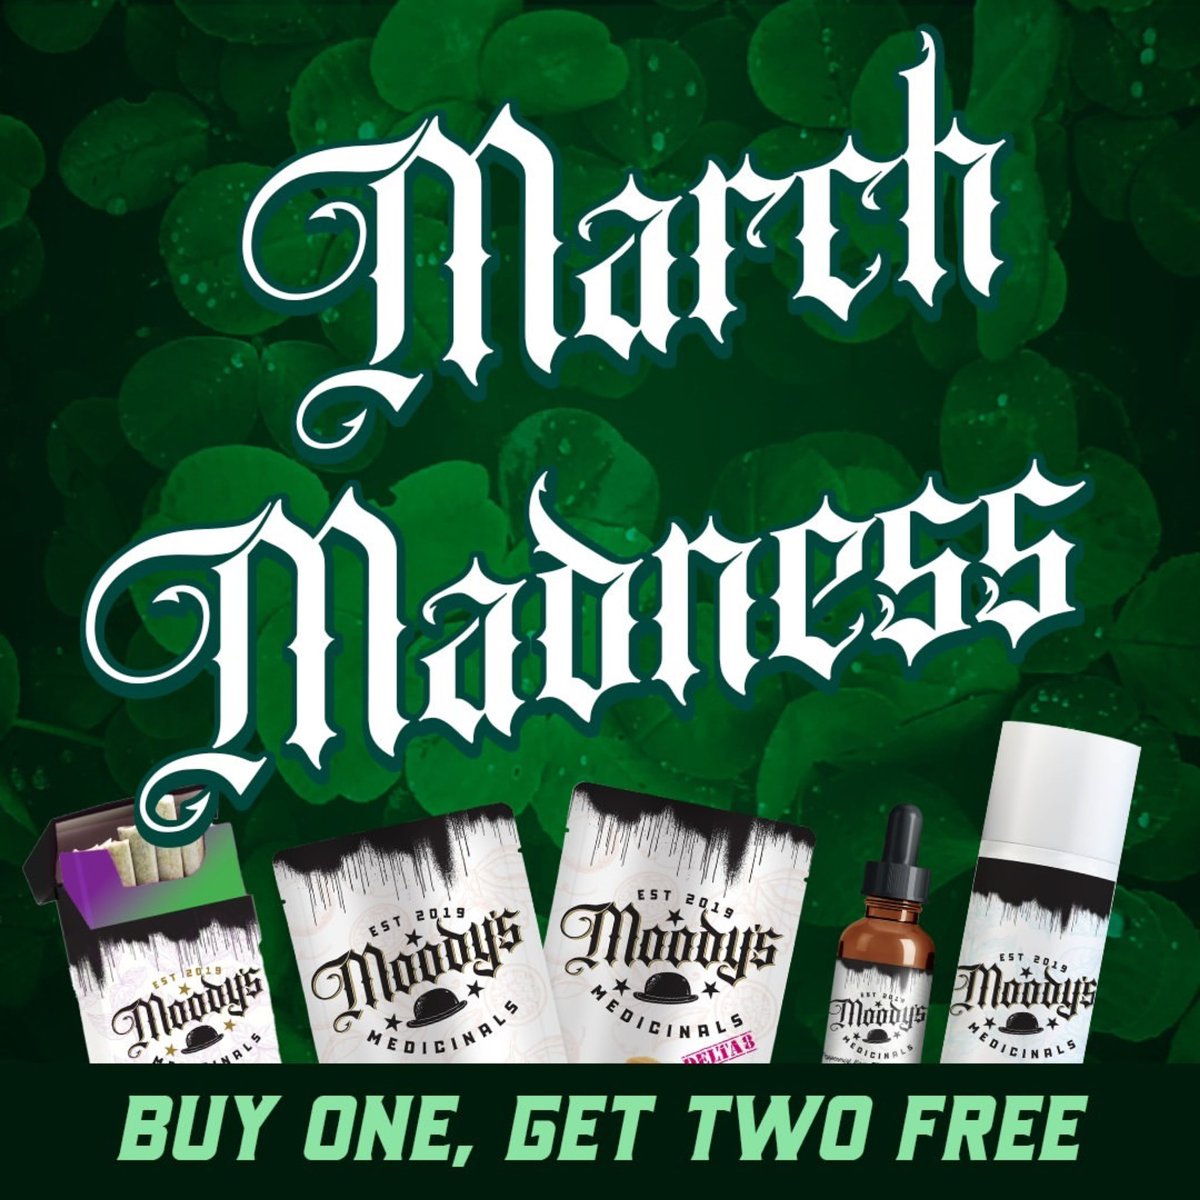 We are kicking off March Madness with a Buy One, Get Two Flash Sale! ⚡ Use promo code 'MADNESS' at checkout while supplies last. Soothe your muscles, joints, and mind with Moody’s Medicinals Intensive Healing Gels, Tinctures, Gummies, and Pre-Rolls. MoodysMedicinals.com